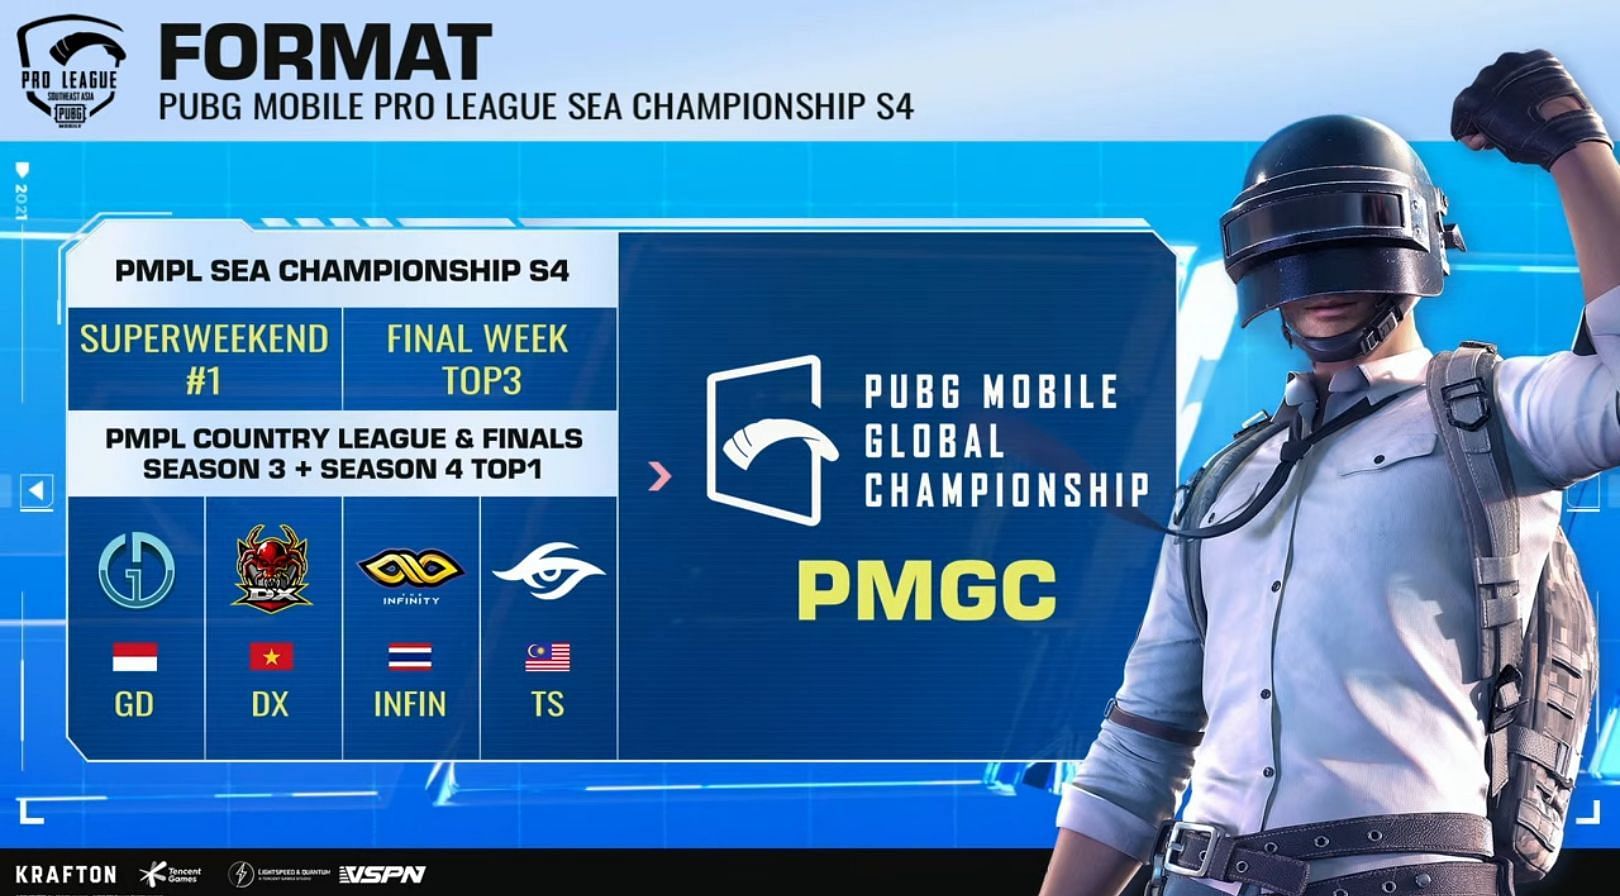 Top 4 teams PMPL SEA Championship 2021 S4 will qualify for PMGC (Image via PUBG Mobile)